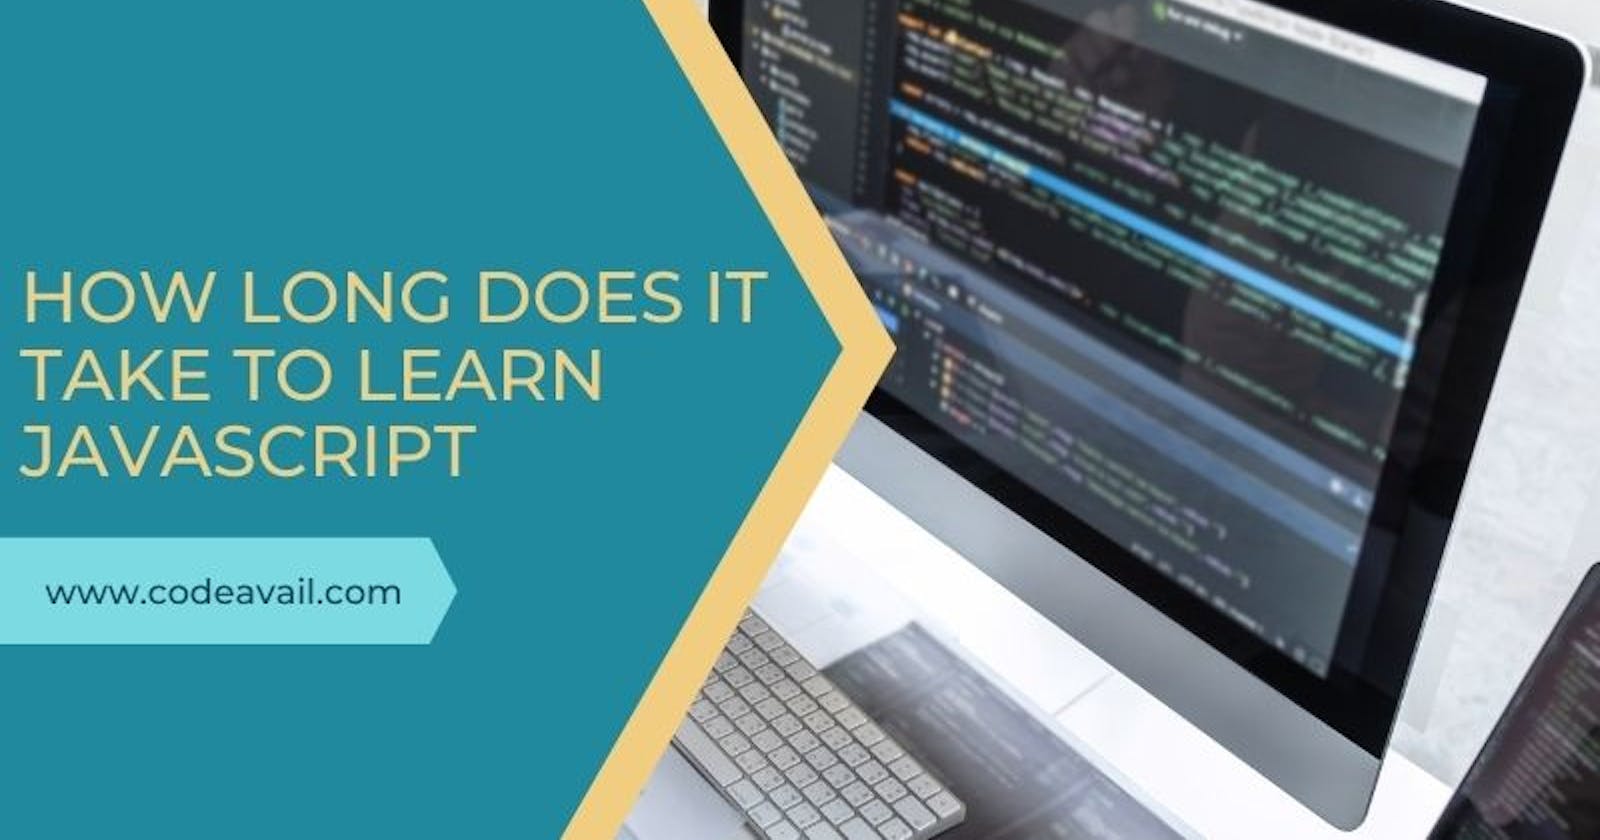 How long does it take to learn Javascript for Beginners?